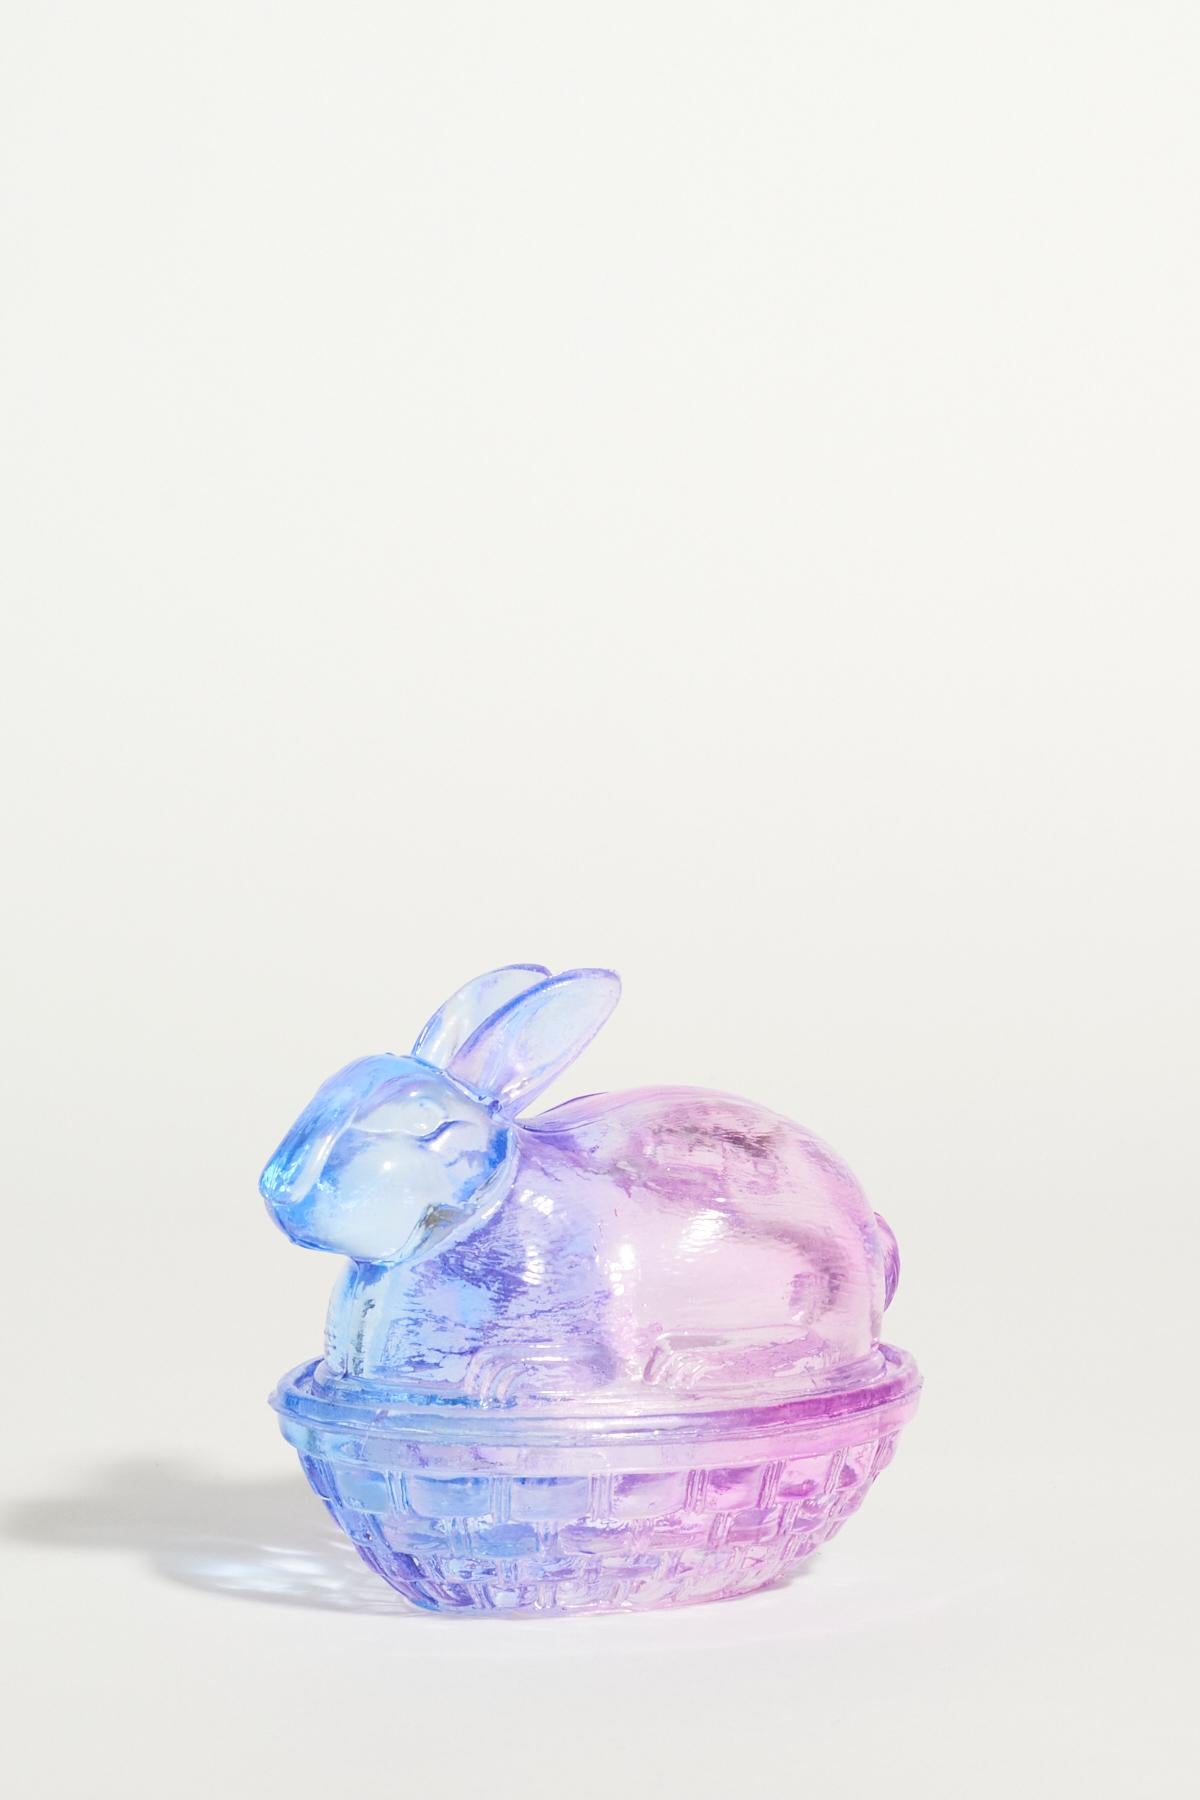 Purple and blue glass bunny lid with basket shaped bowl.